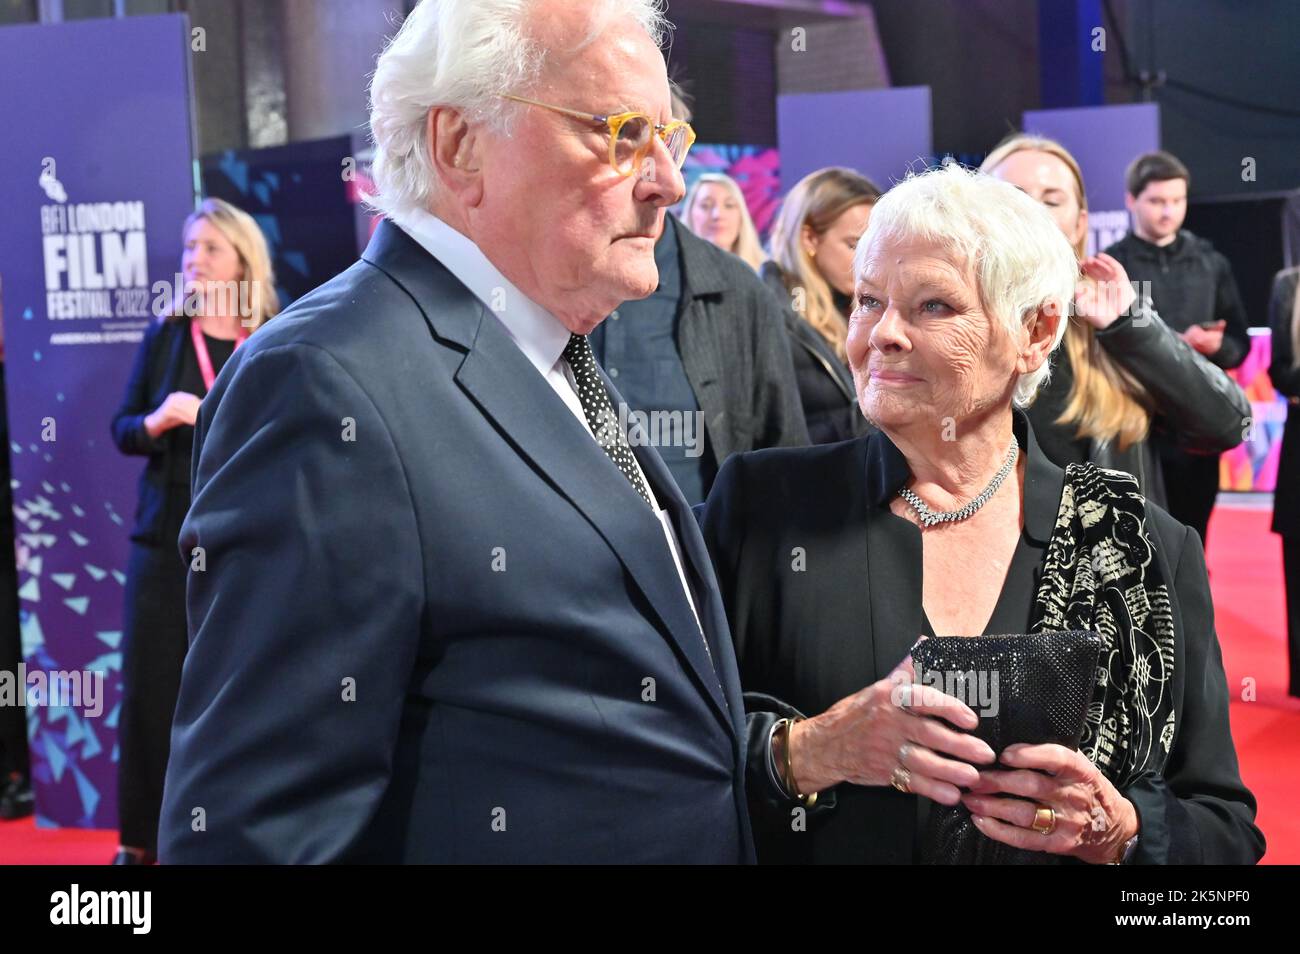 London, UK. 09th Oct, 2022. Director,Richard Eyre and Judi Dench arrive at the Allelujah - European Premiere of the BFI London Film Festival’s 2022 on 9th October 2022 at the South Bank, Royal Festival Hall, London, UK. Credit: See Li/Picture Capital/Alamy Live News Stock Photo